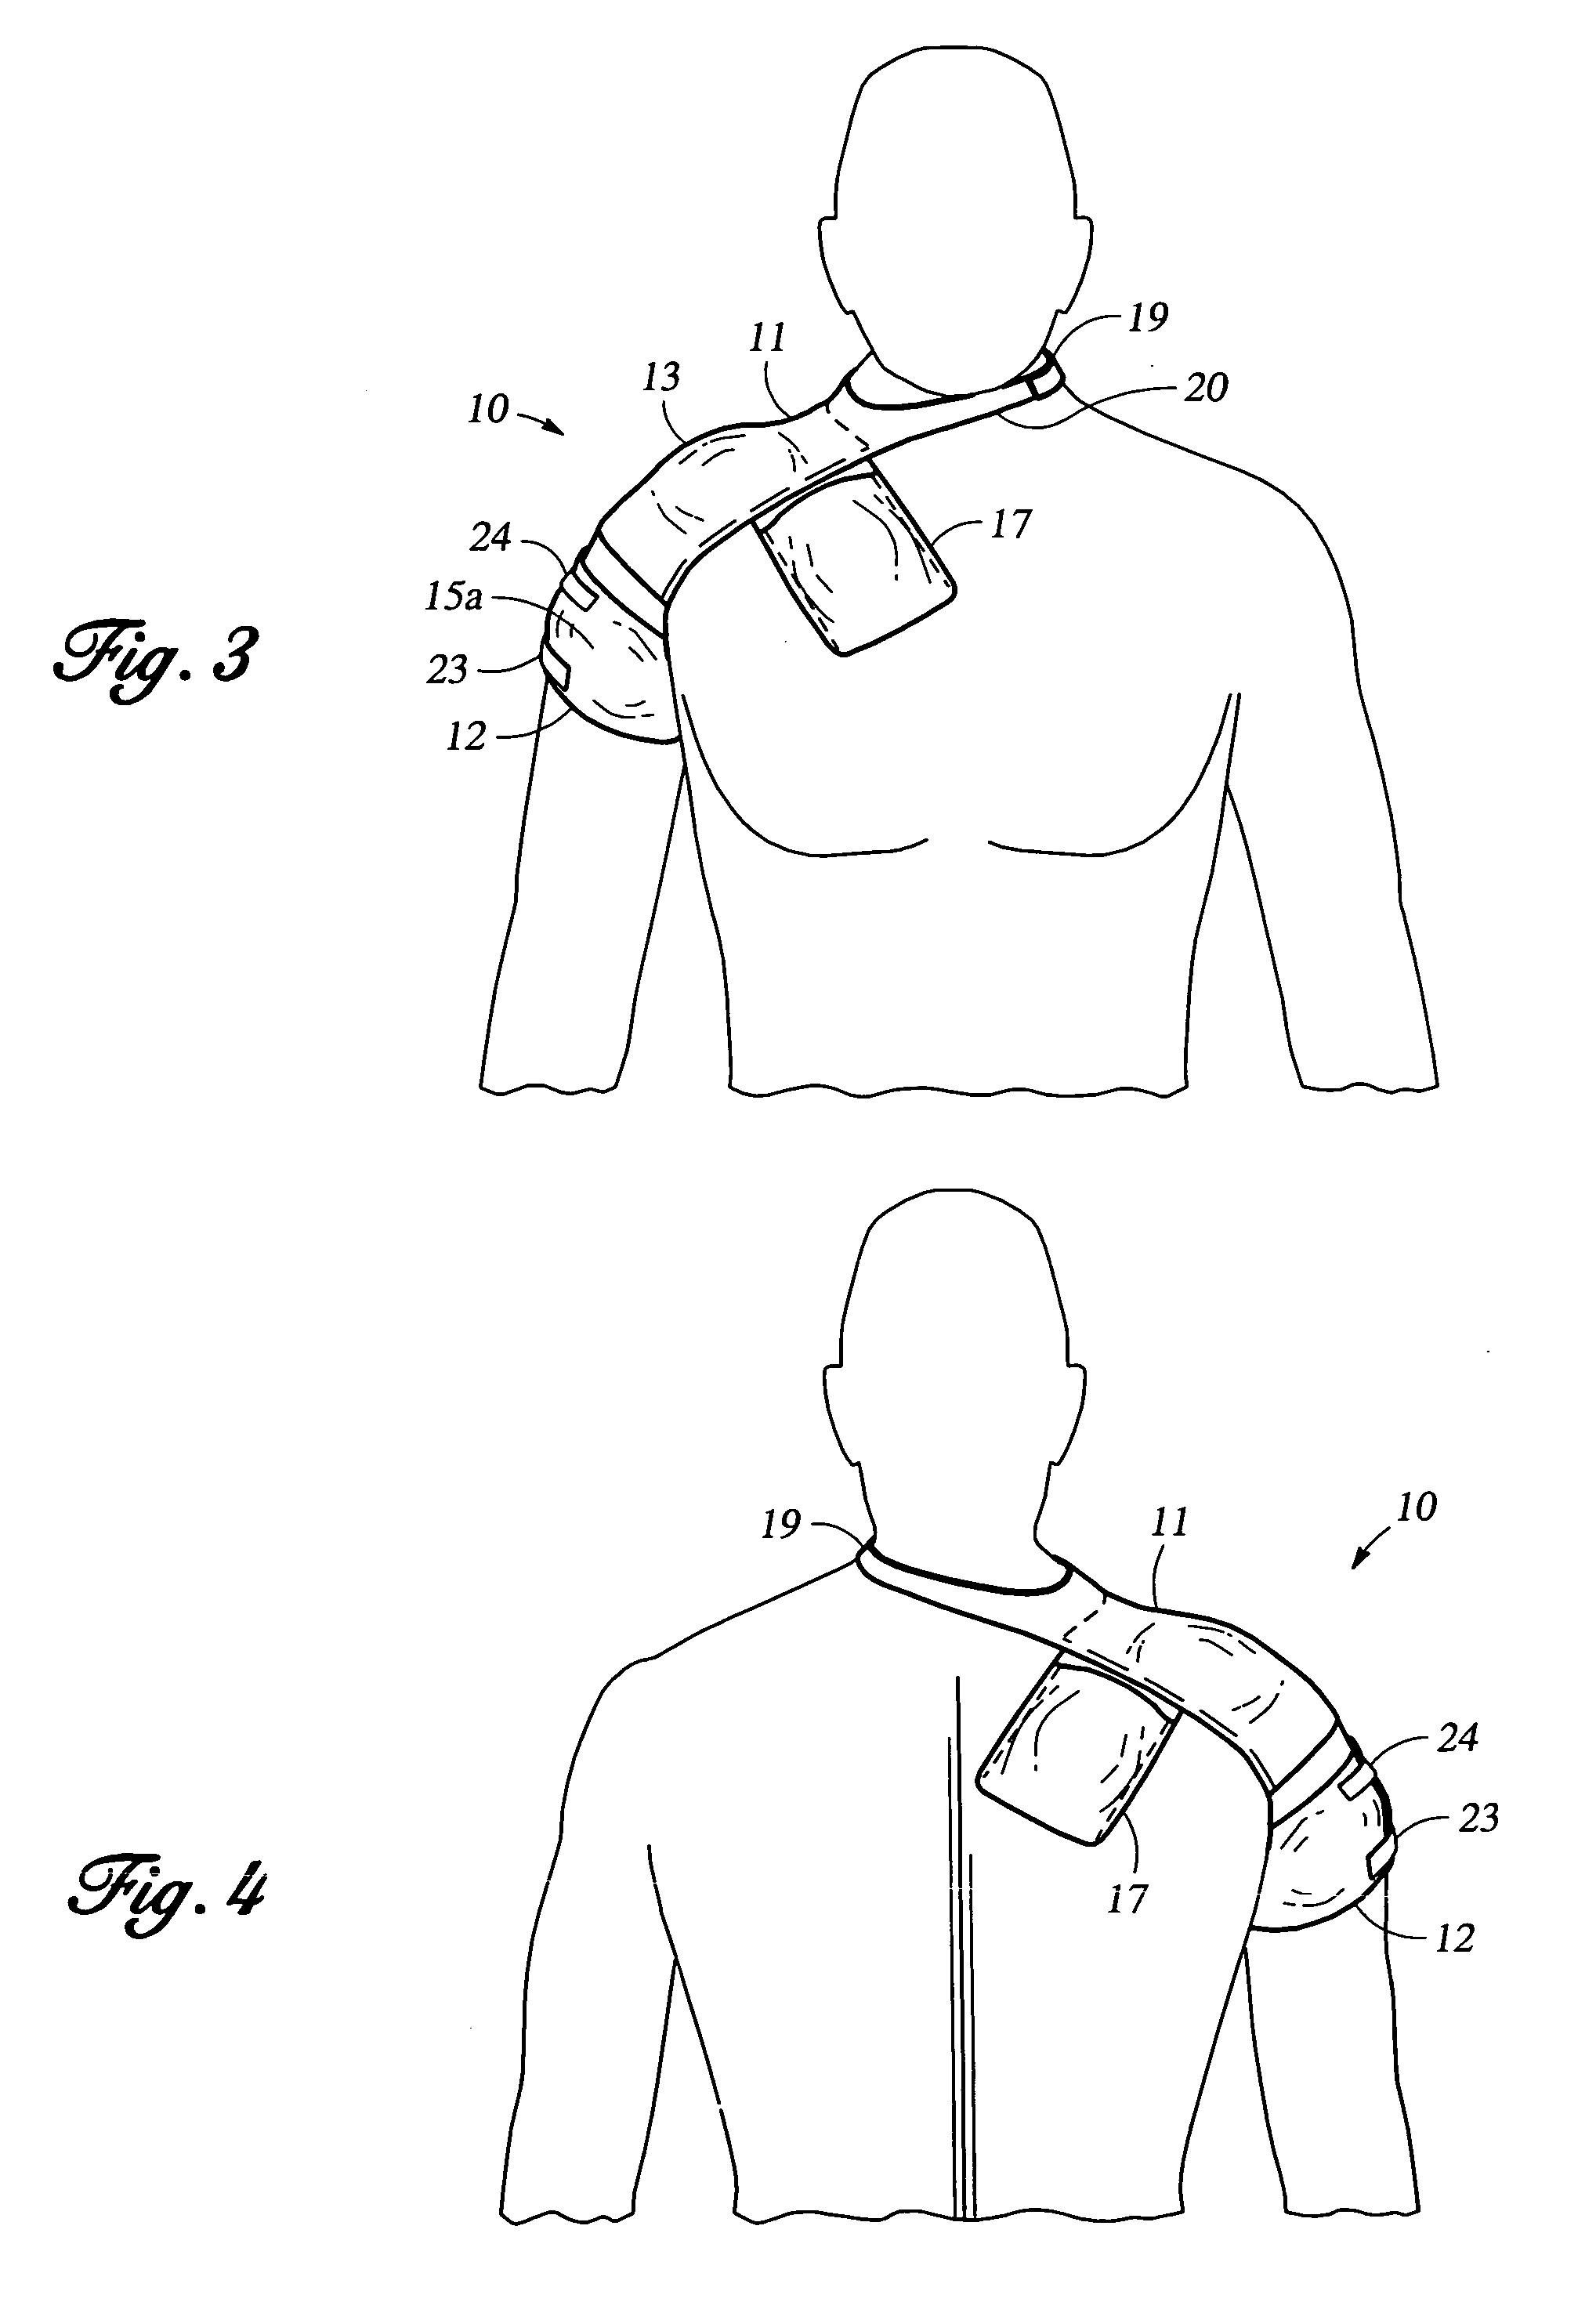 Device for cooling shoulder joint and nearby muscles